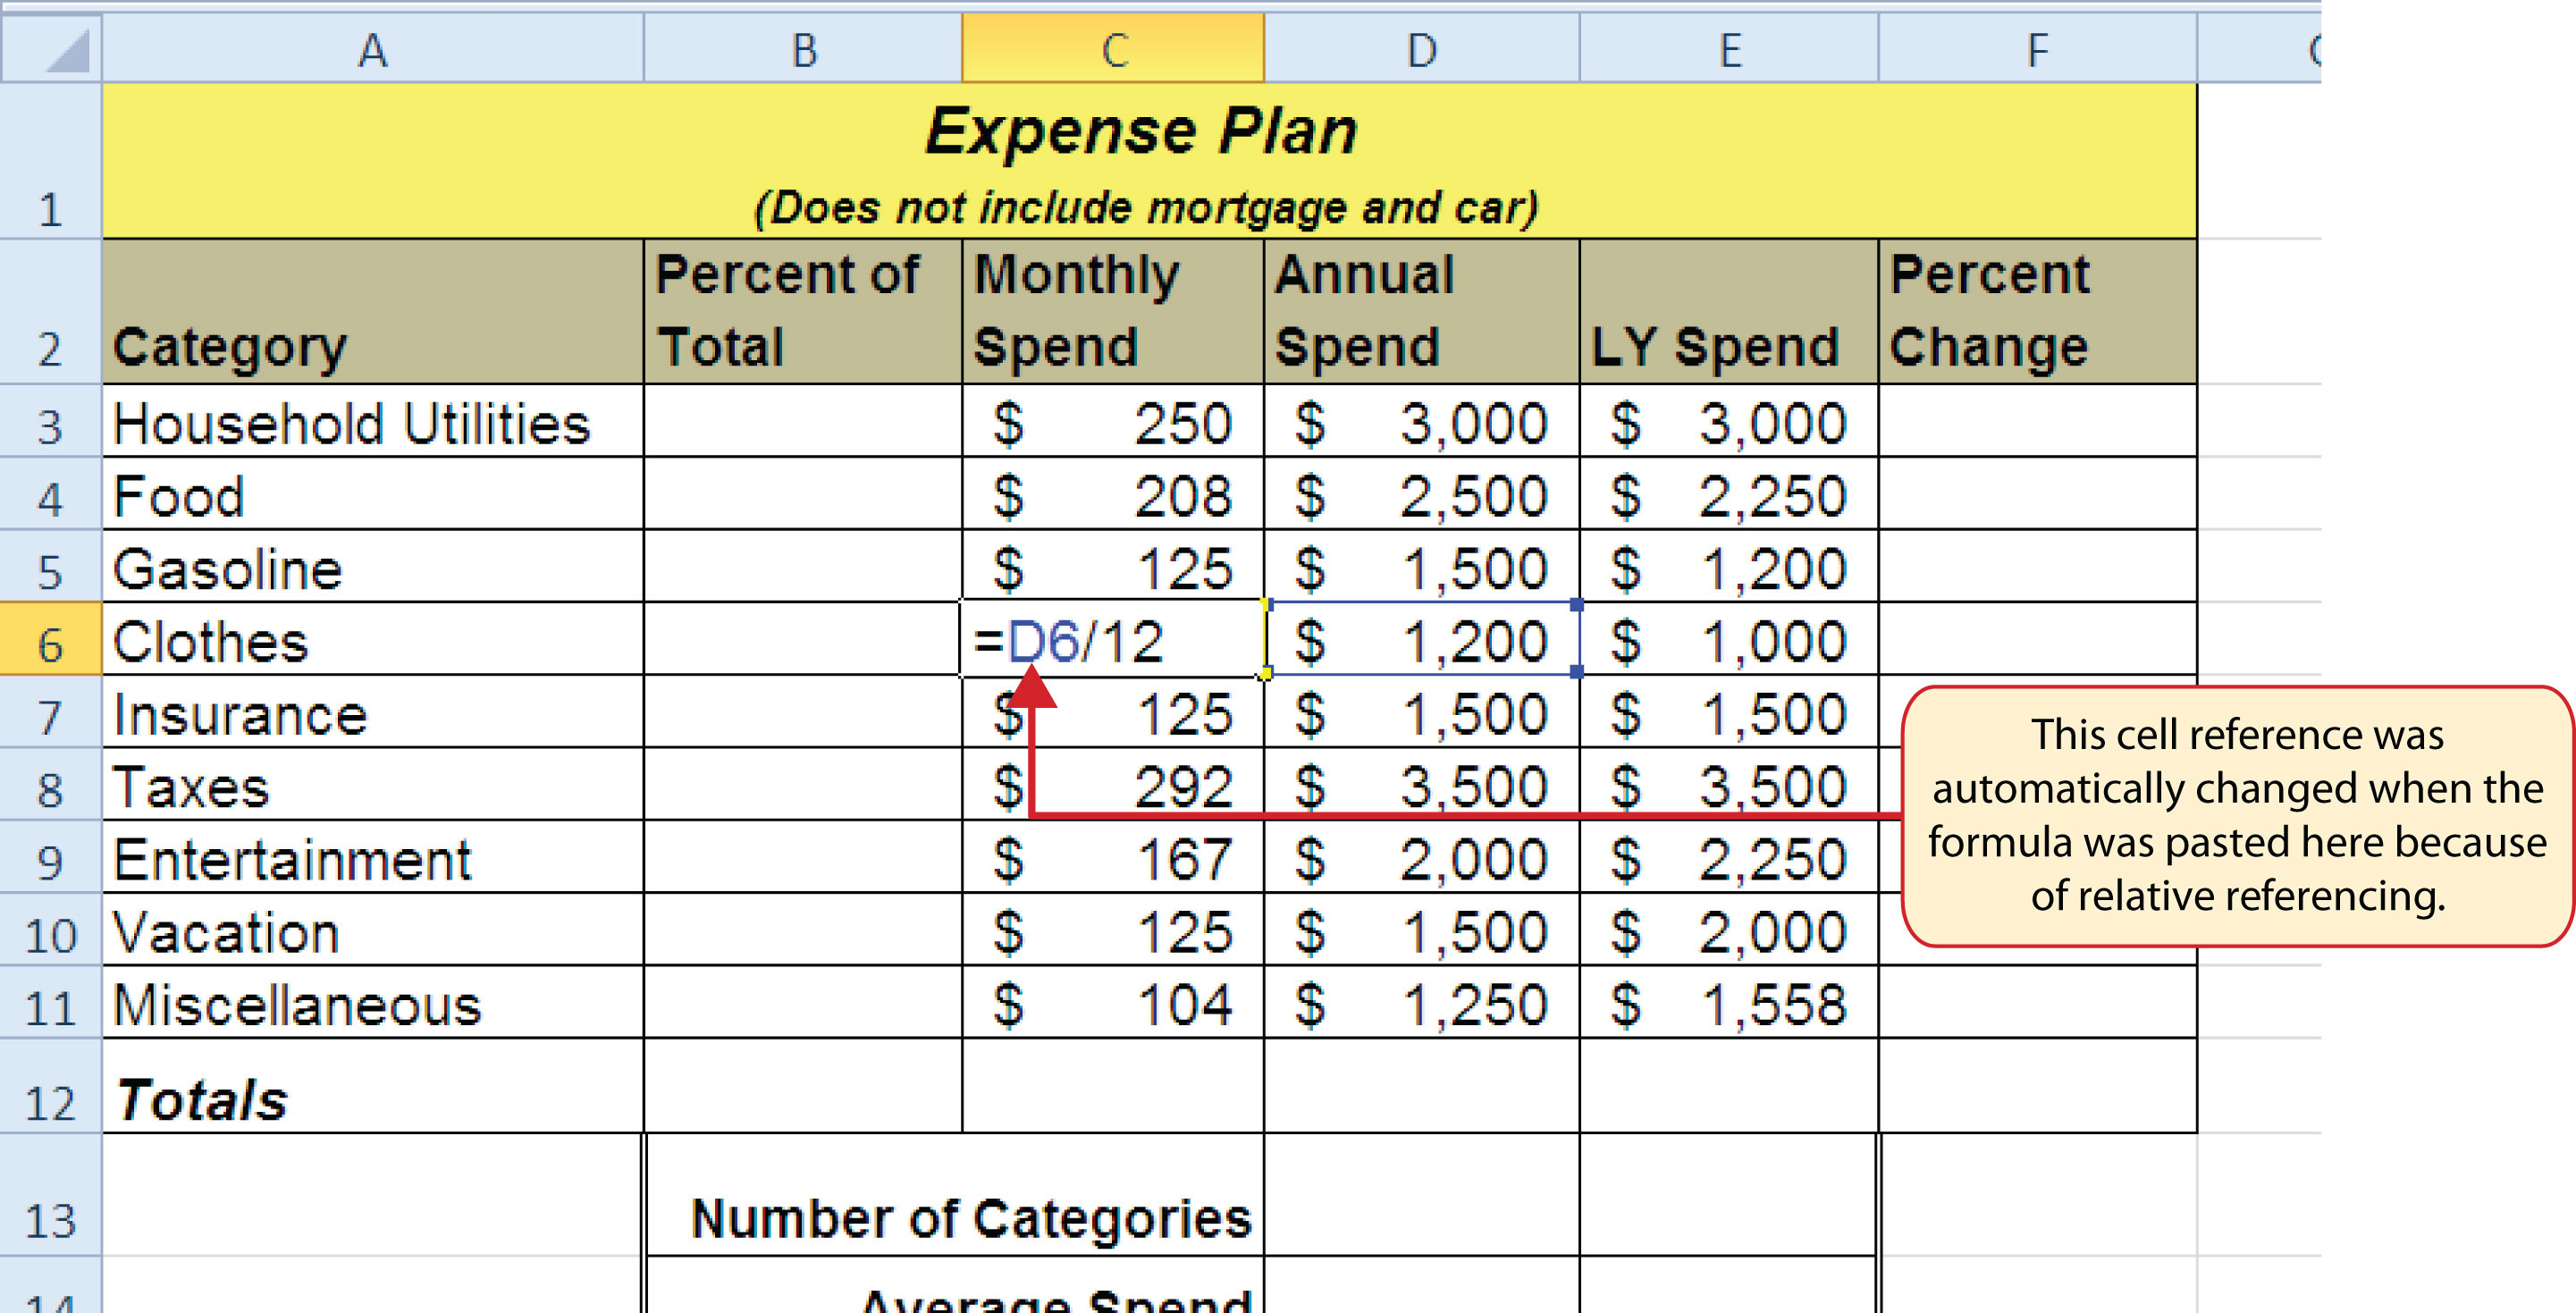 Excel Accounting Formulas Spreadsheet – Spreadsheet Collections With Excel Accounting Formulas Spreadsheet